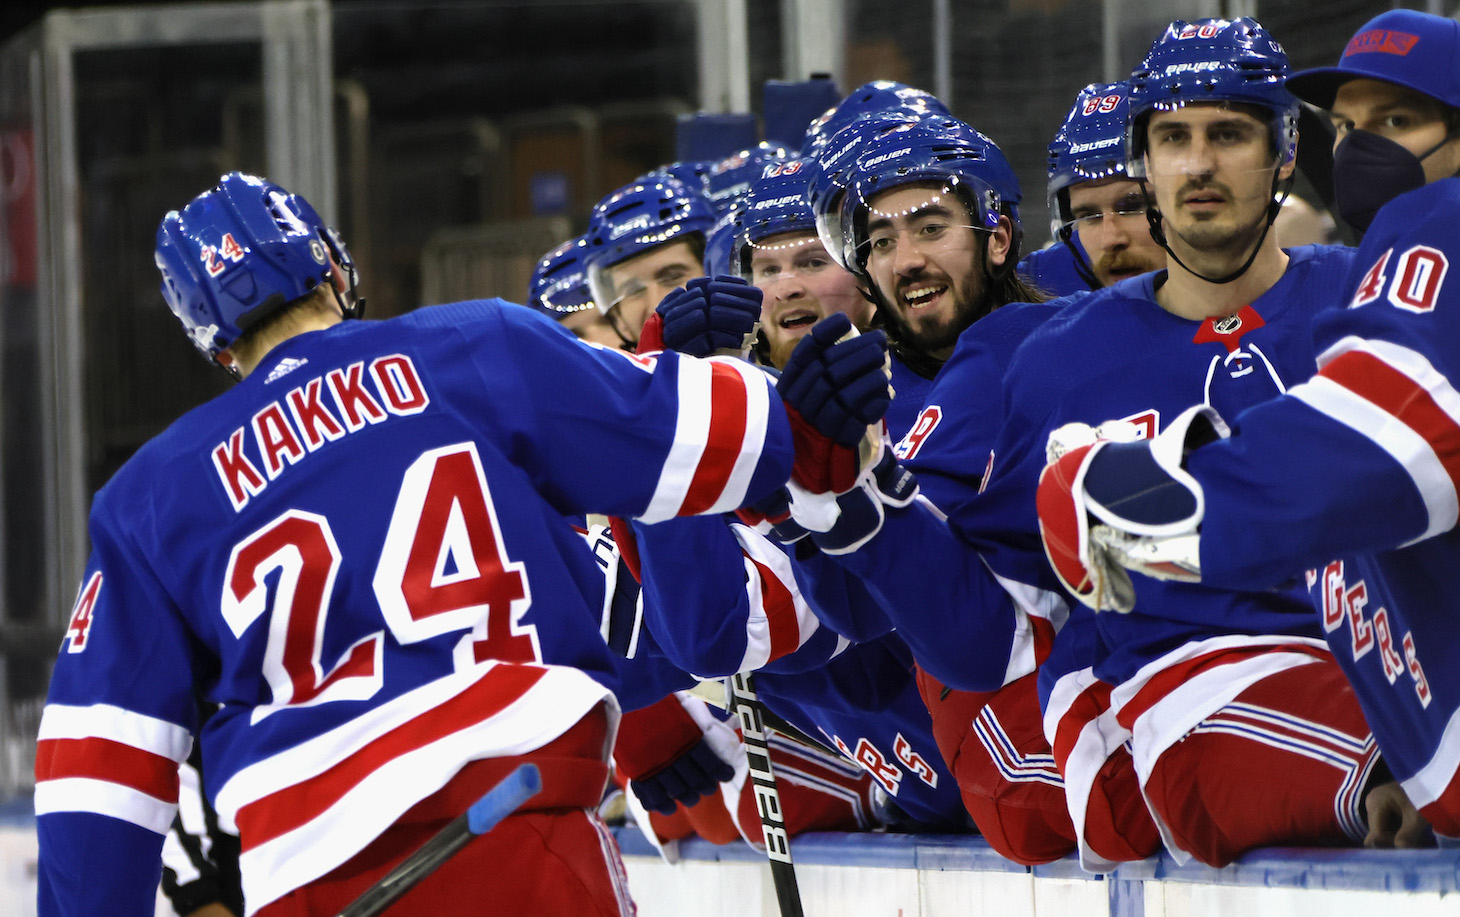 NEW YORK, NEW YORK - MARCH 22: The New York Rangers celebrate a second period goal by Kaapo Kakko #24 against the Buffalo Sabres at Madison Square Garden on March 22, 2021 in New York City. (Photo by Bruce Bennett/Getty Images)